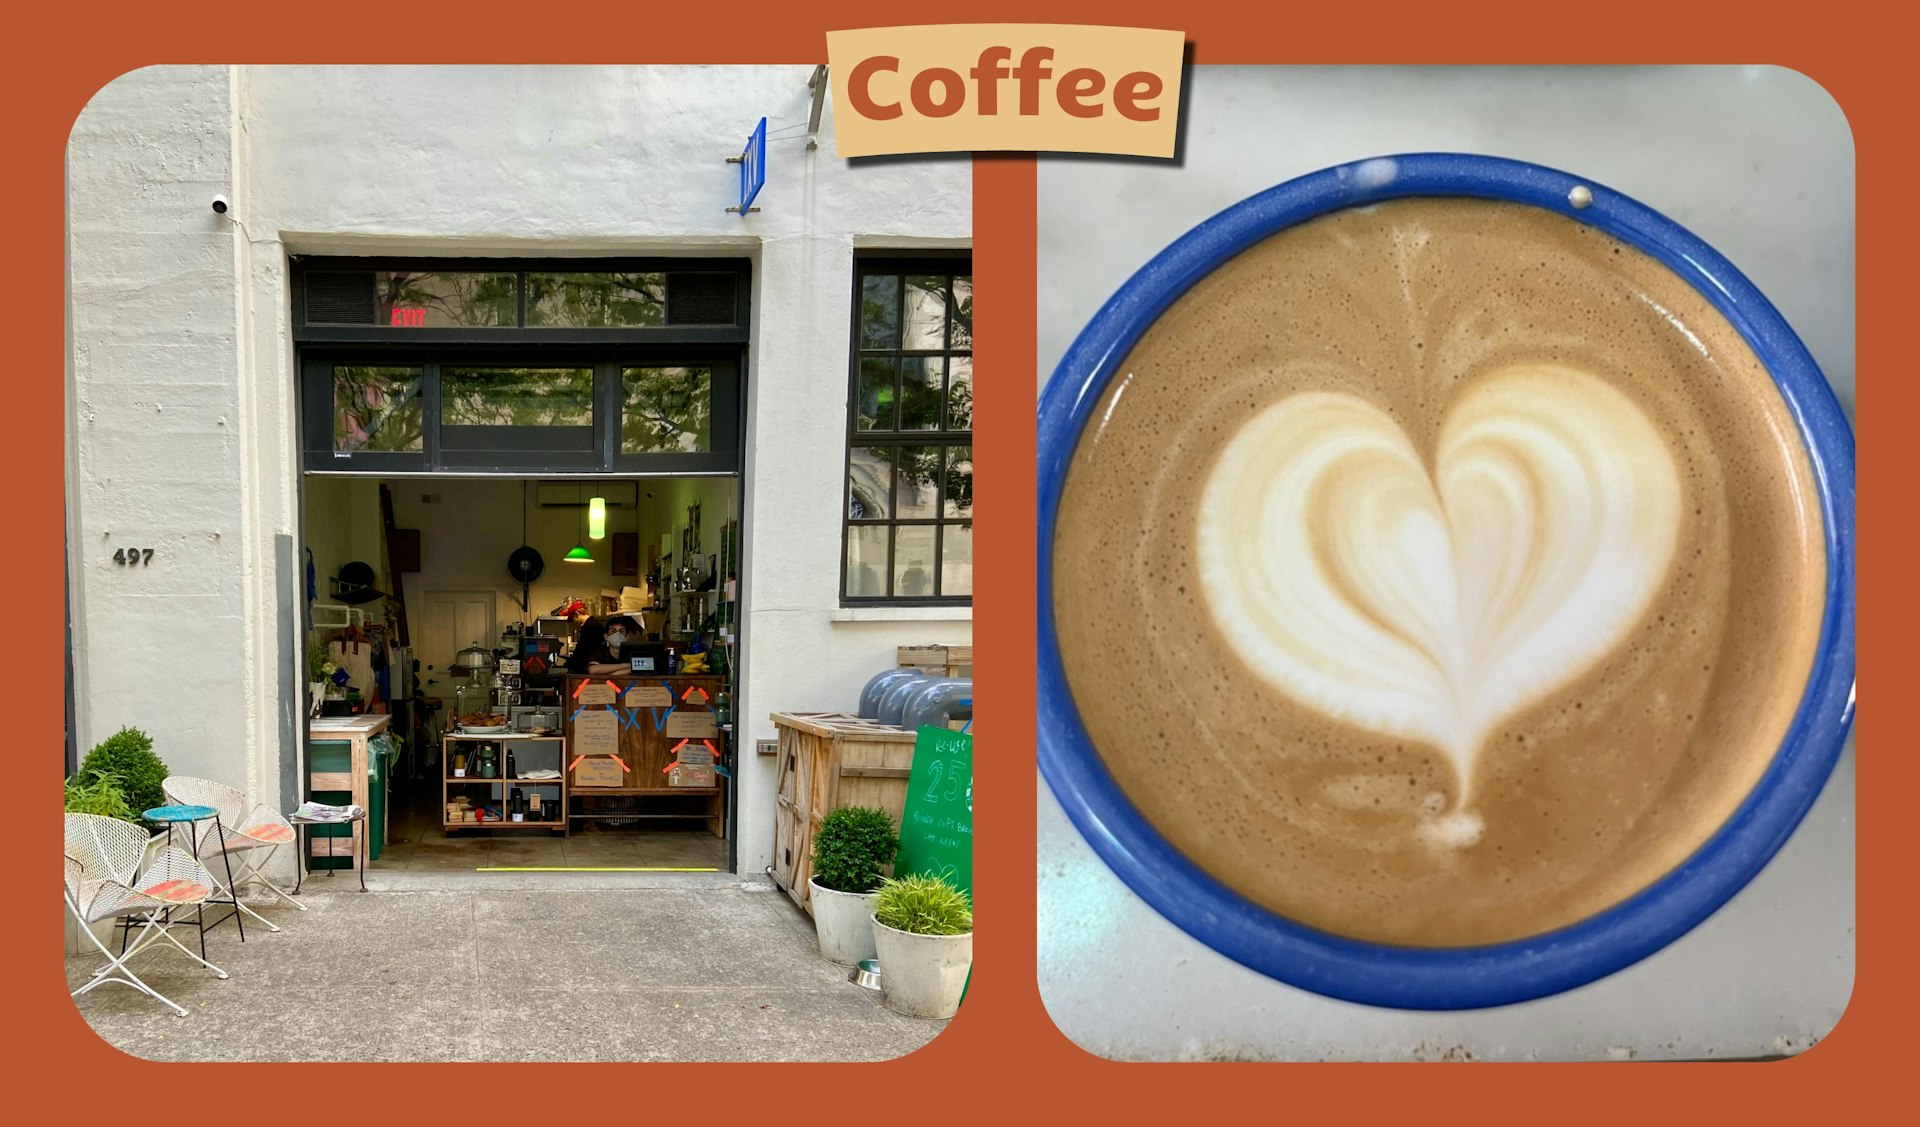 Collage of the IXV Coffee storefront and one of their lattes with heart latte art 